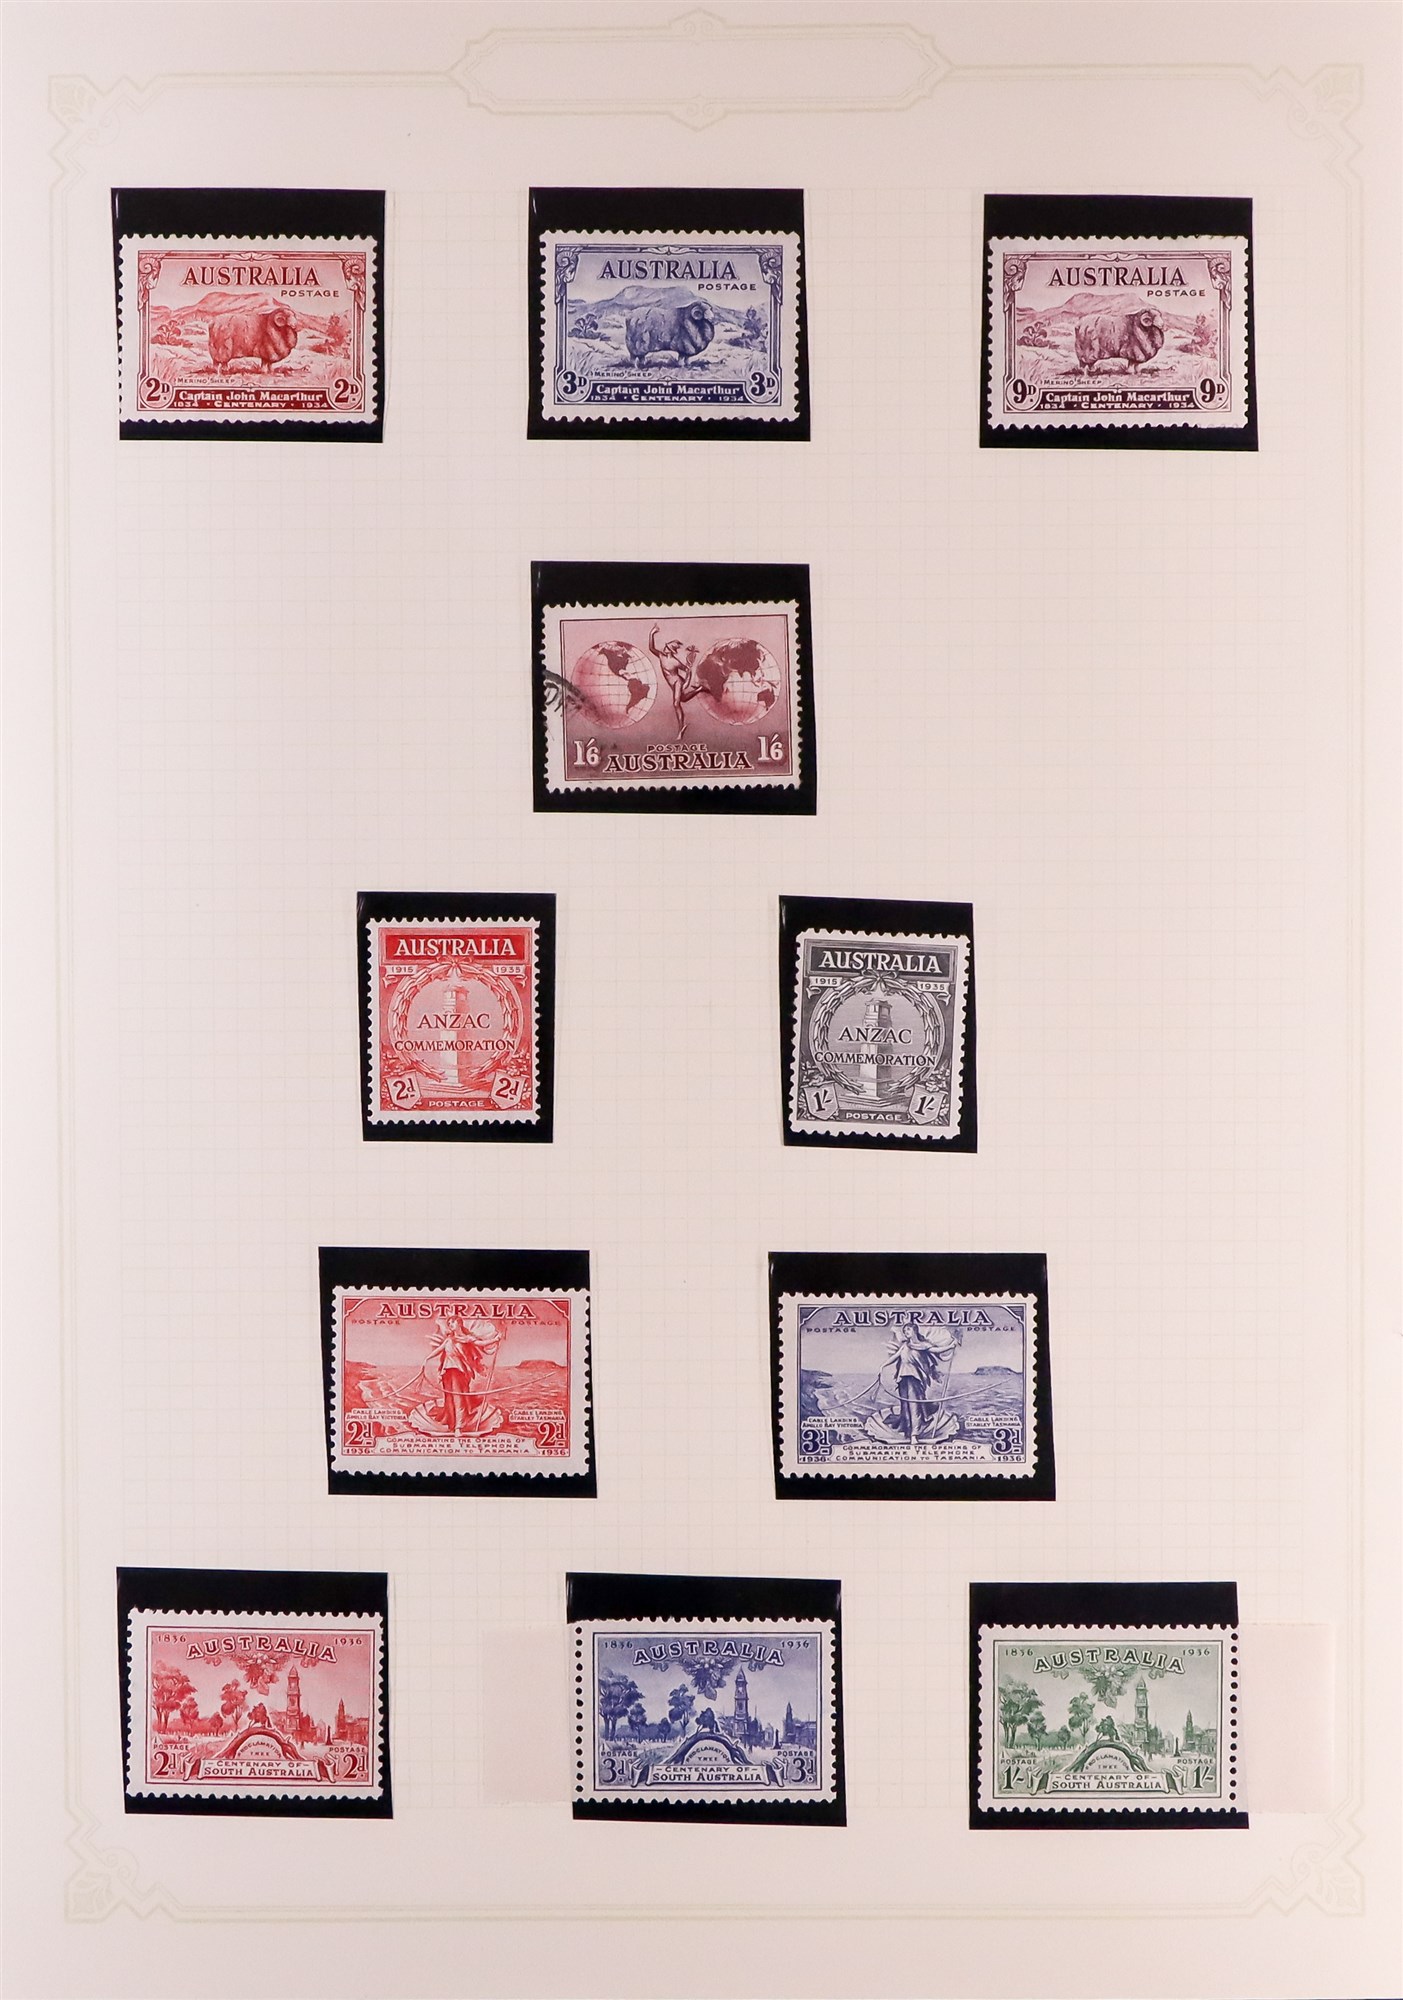 AUSTRALIA 1913 - 1936 VALUABLE MINT COLLECTION incl. 1913-14 1st Wmk Roos to 2s and 5s, 1918-23 to - Image 9 of 9